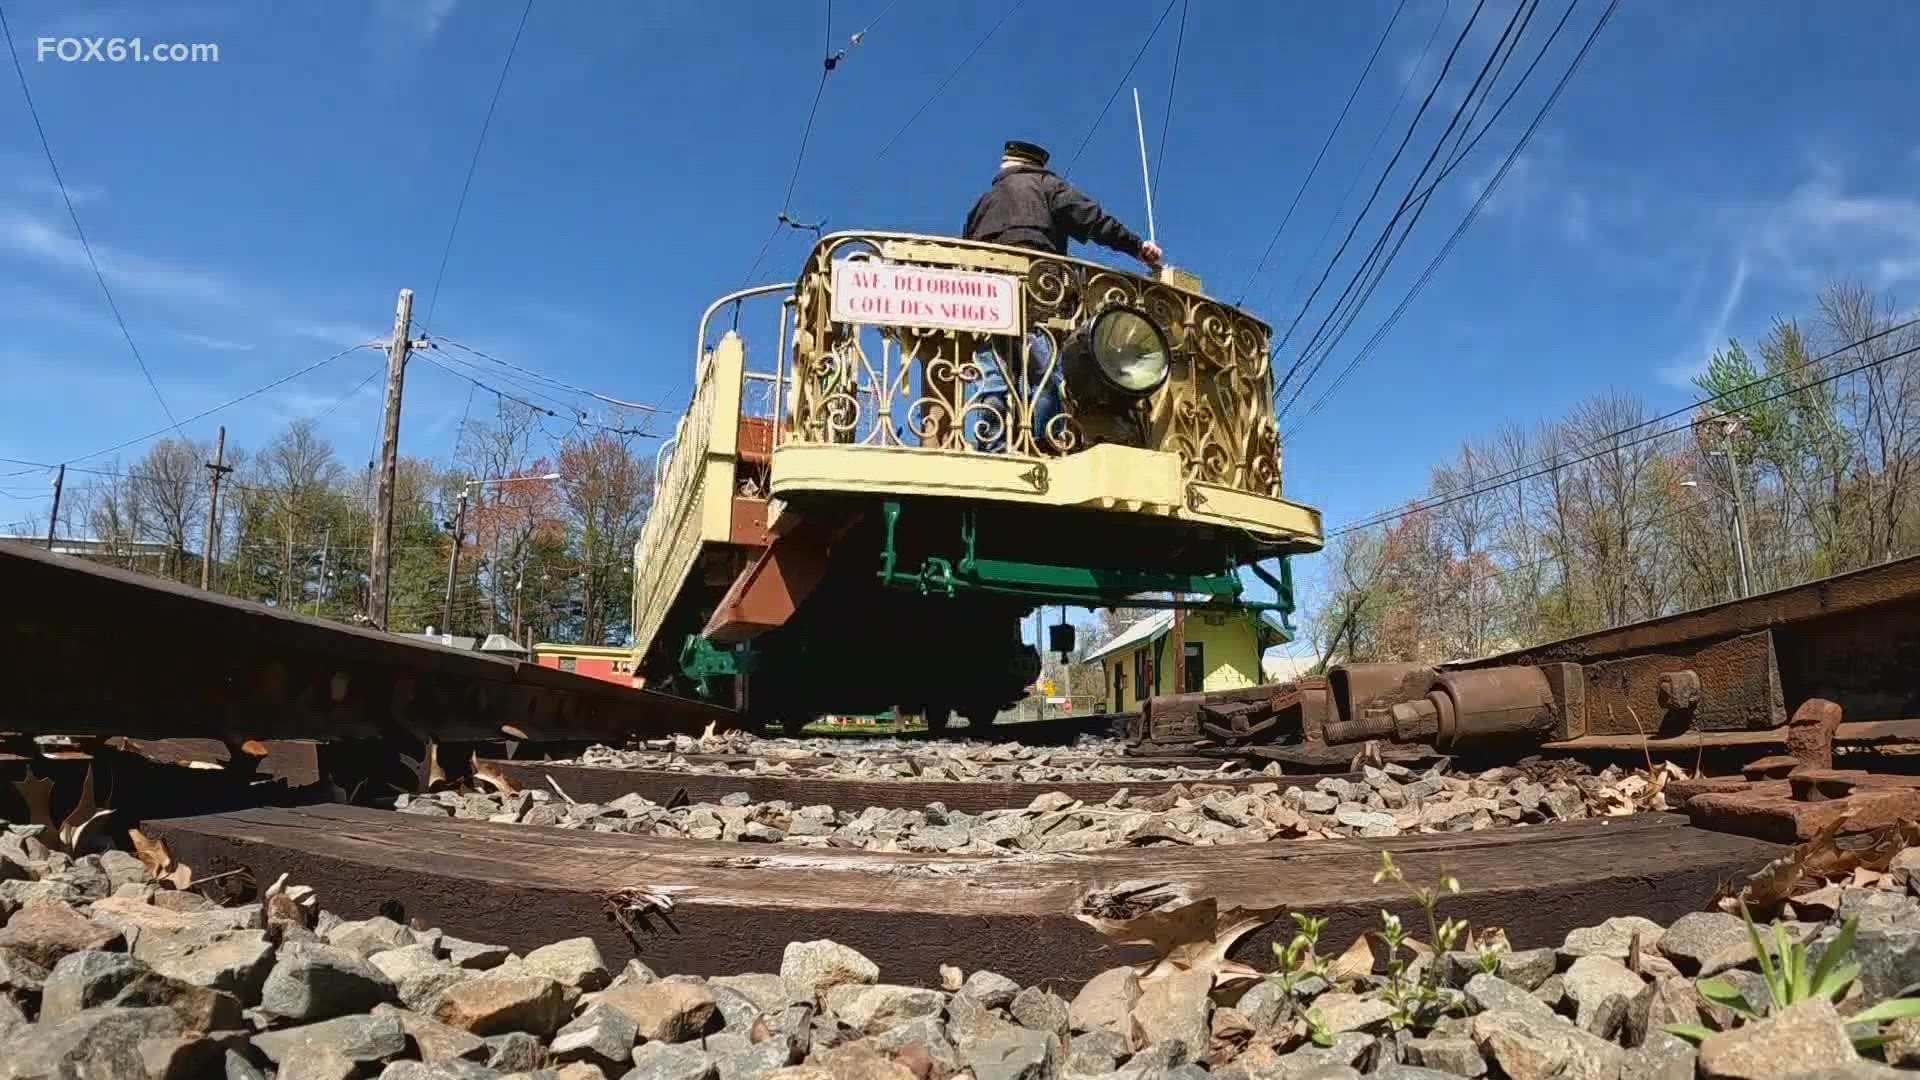 After more than two years of COVID-19 restrictions, the Connecticut Trolley Museum is open again.